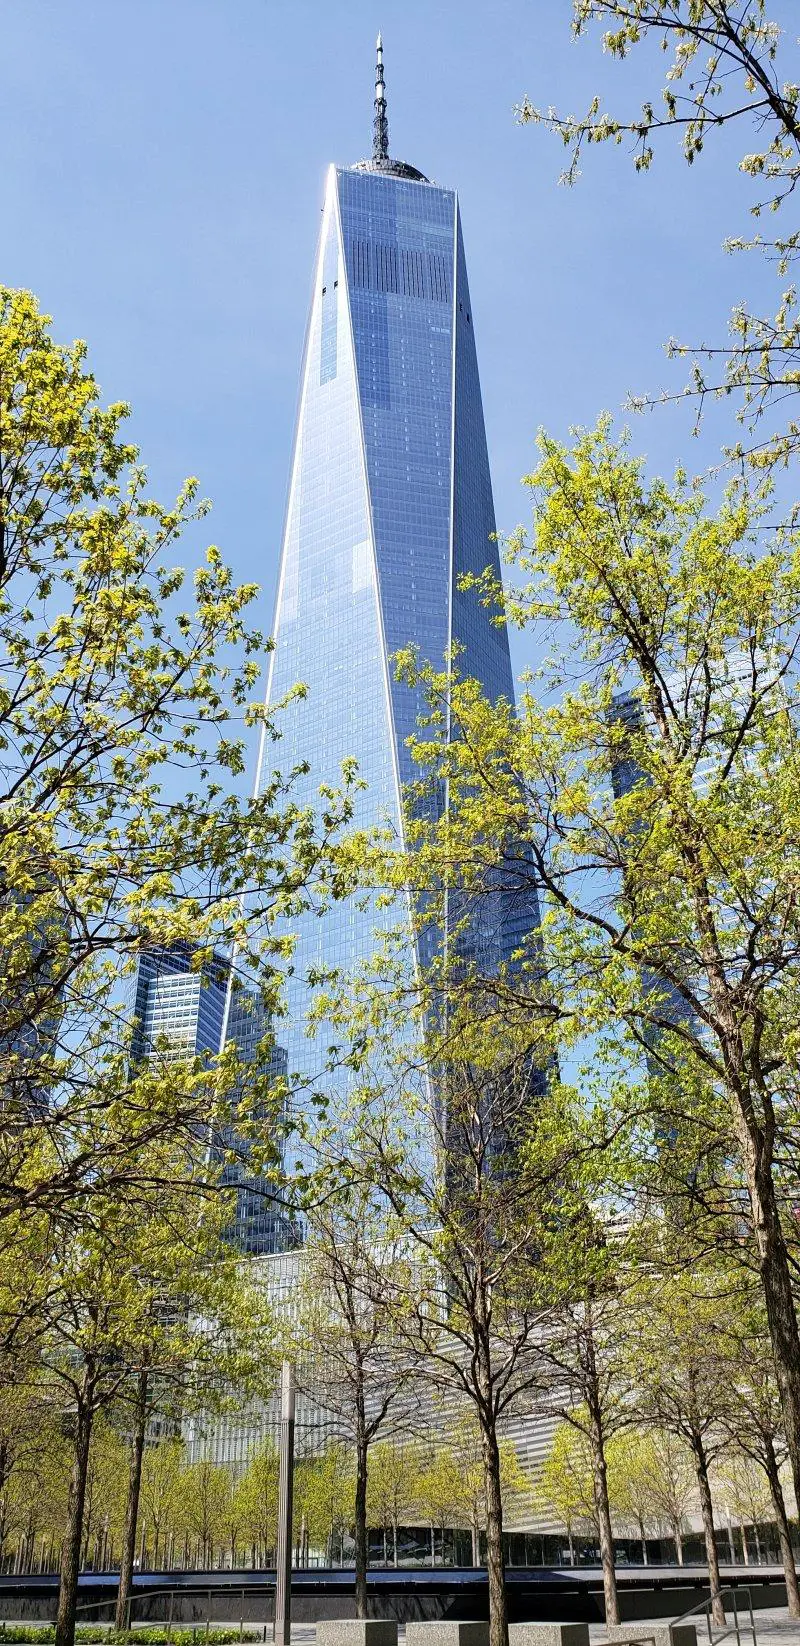 The 9/11 Memorial is closed, keeping clear the view of the One World Trade Center | janavar